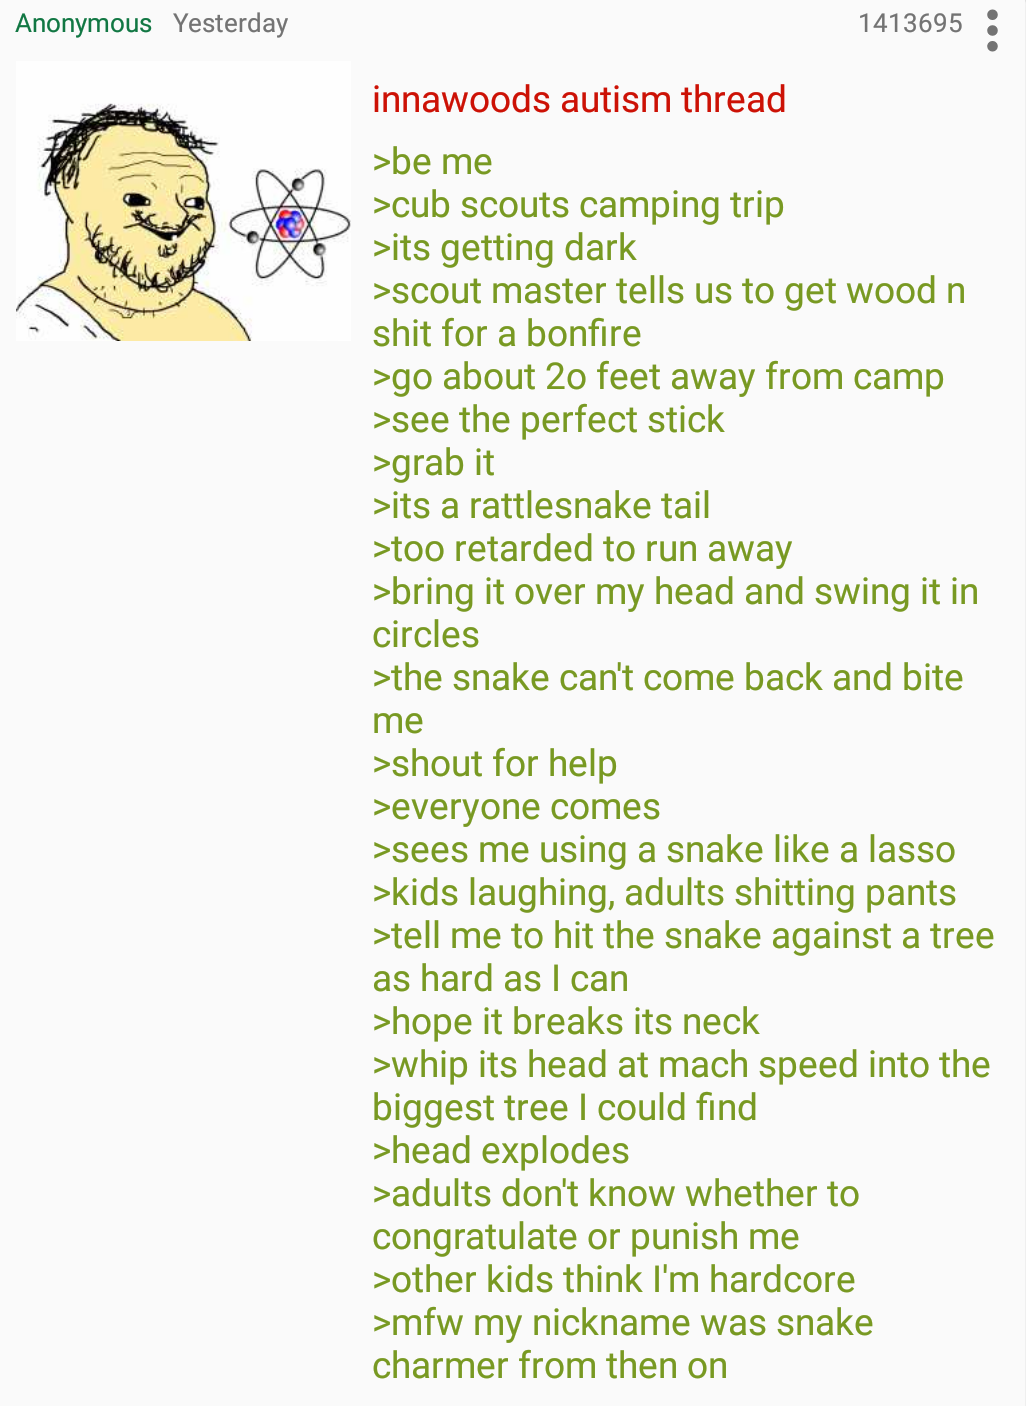 Anon and the snek